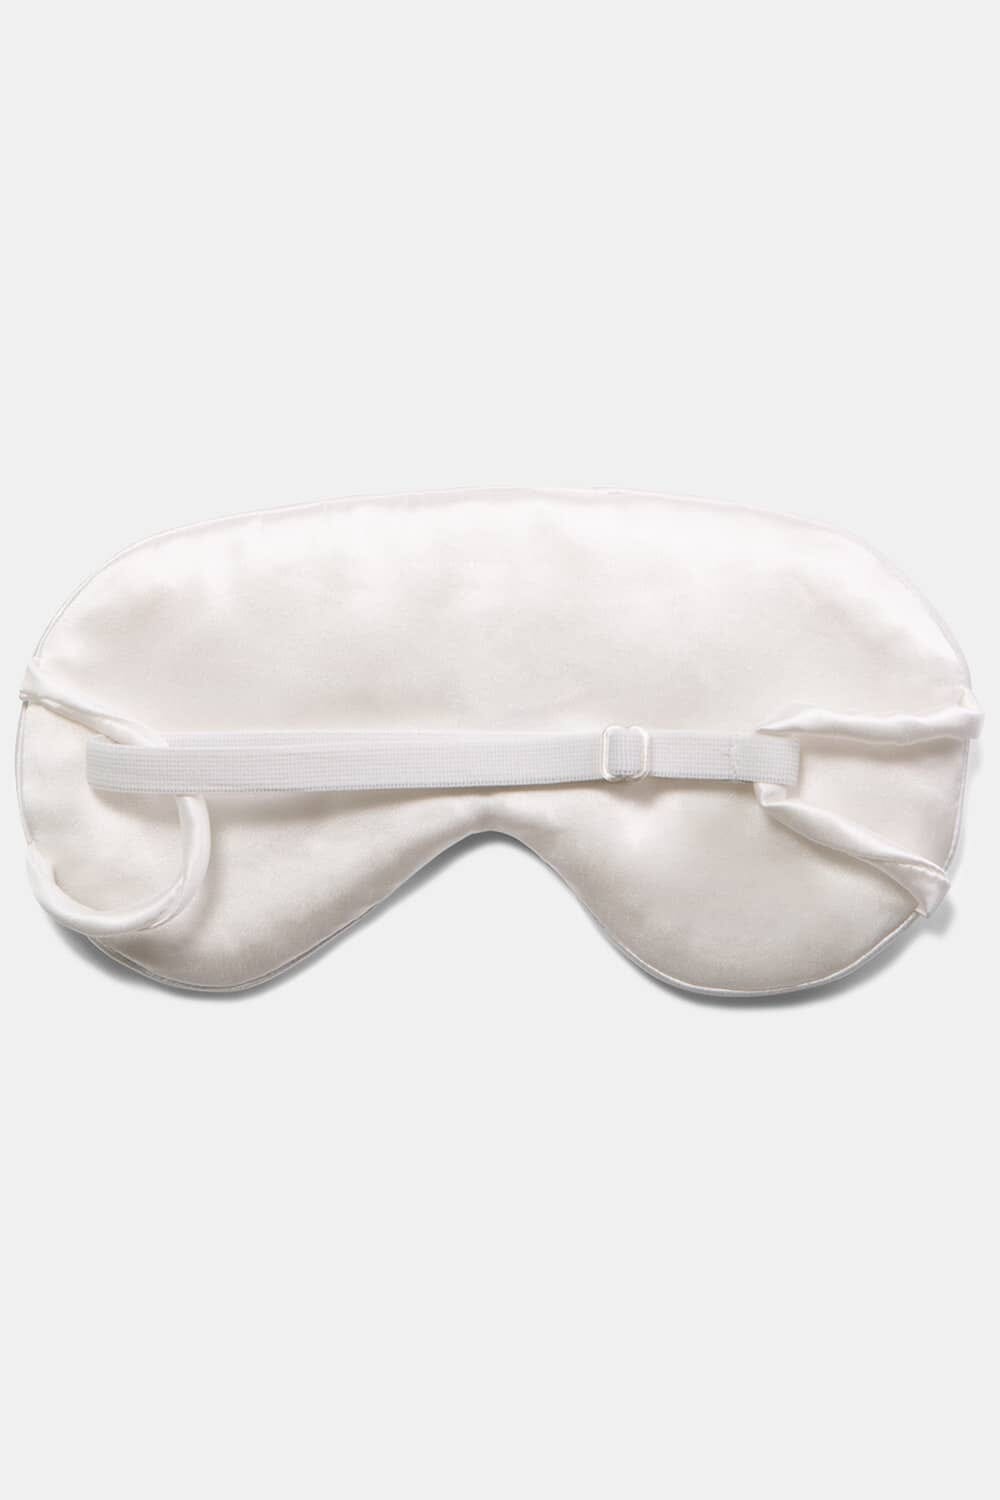 100% Mulberry Silk Therapeutic Sleep Mask - 25 Momme Beauty>Masks Fishers Finery 